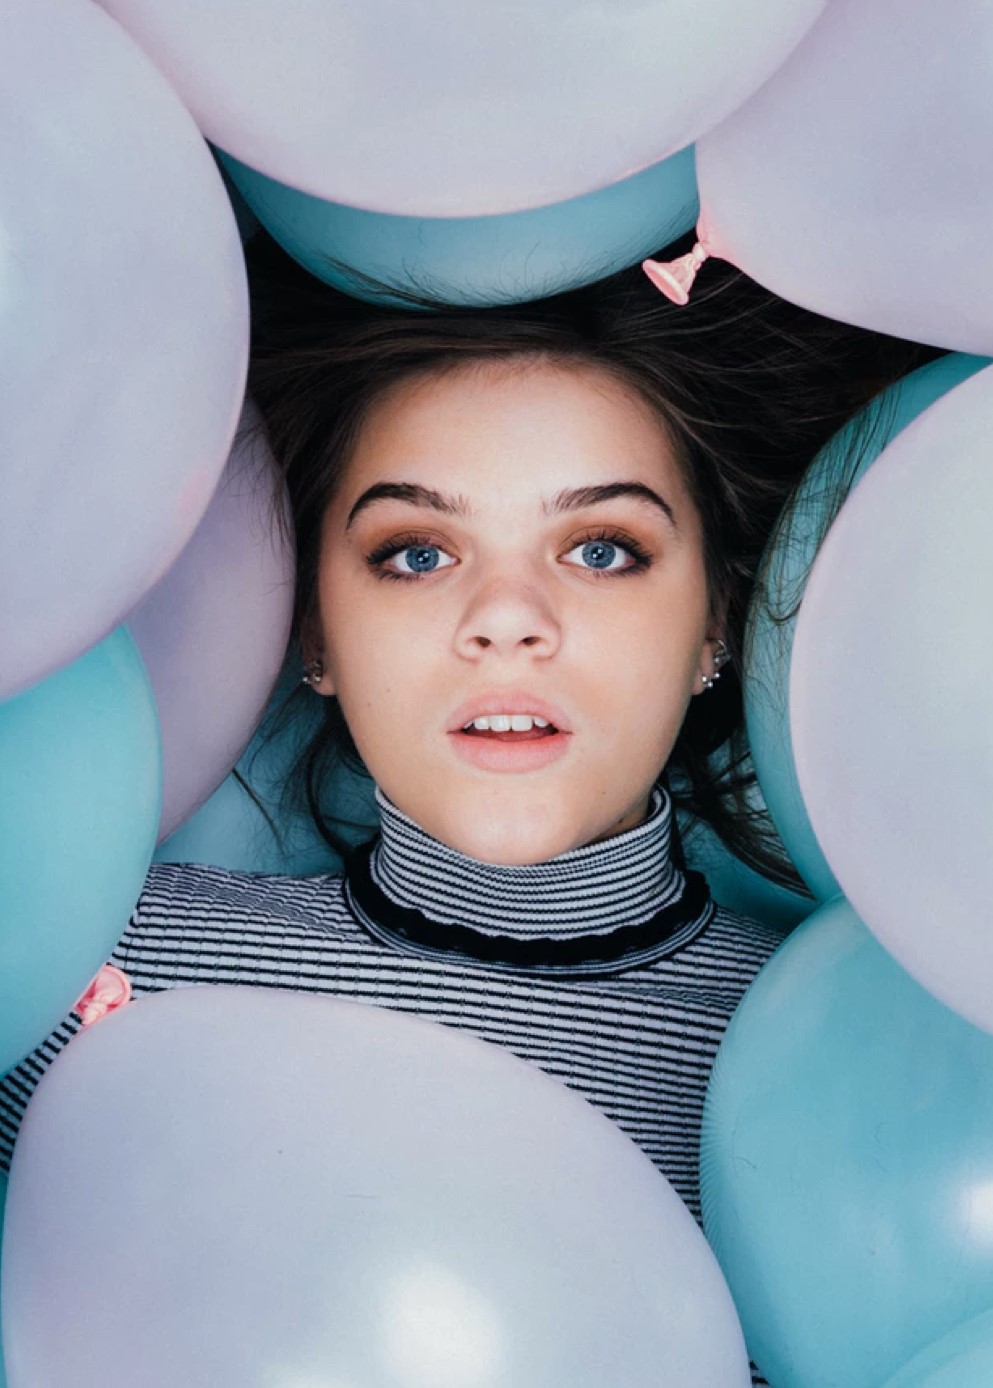 Headshot of person surrounded by pink and blue balloons.